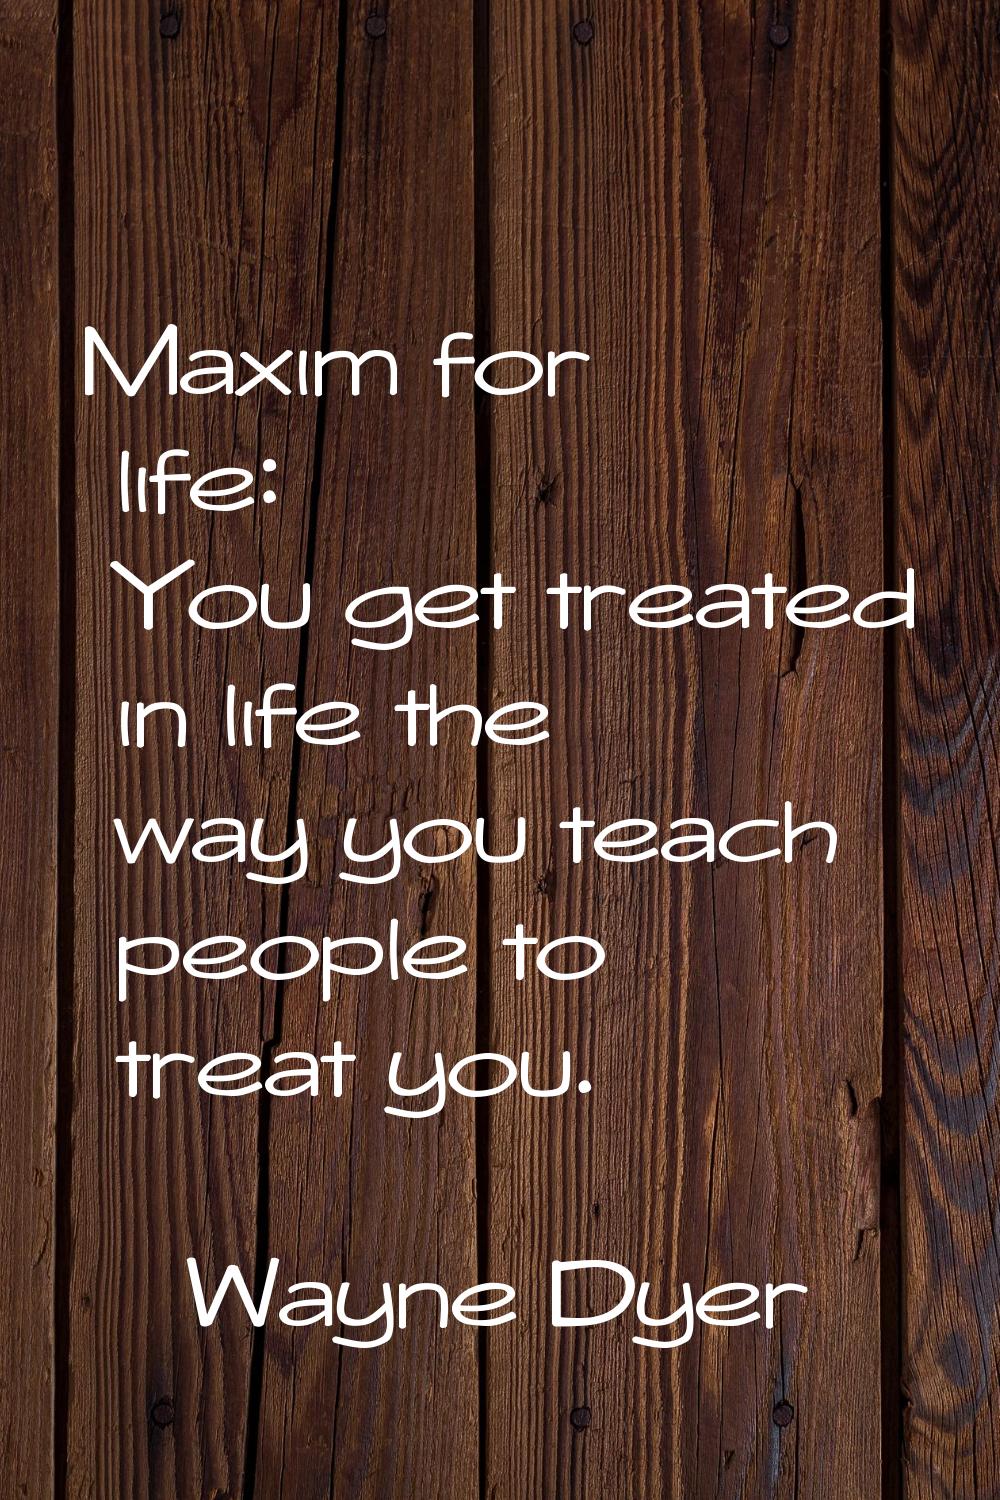 Maxim for life: You get treated in life the way you teach people to treat you.